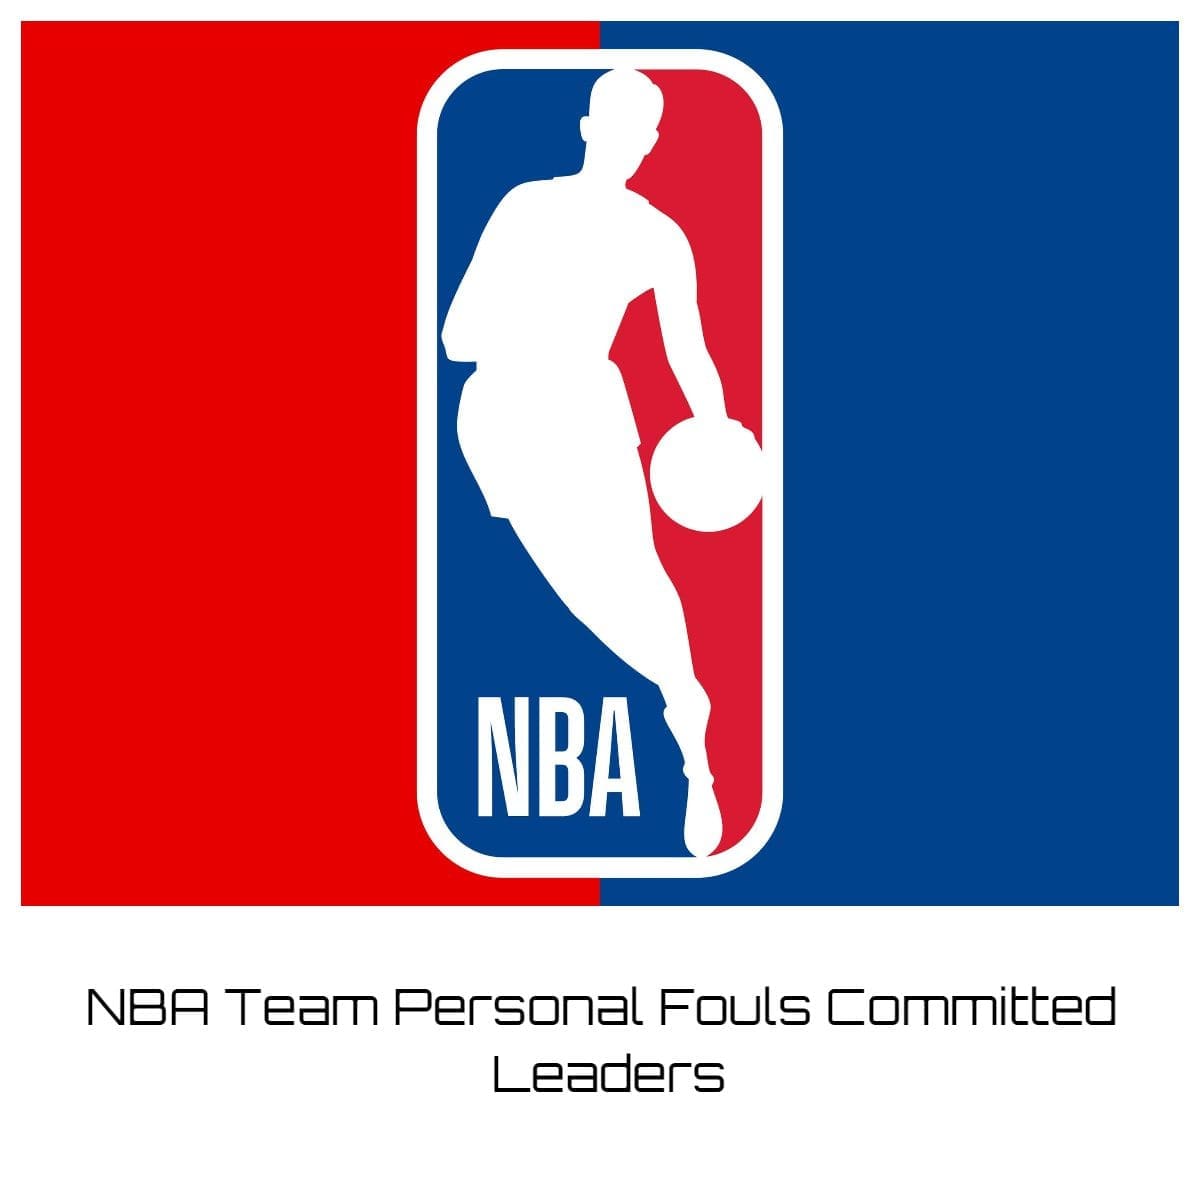 NBA Team Personal Fouls Committed Leaders